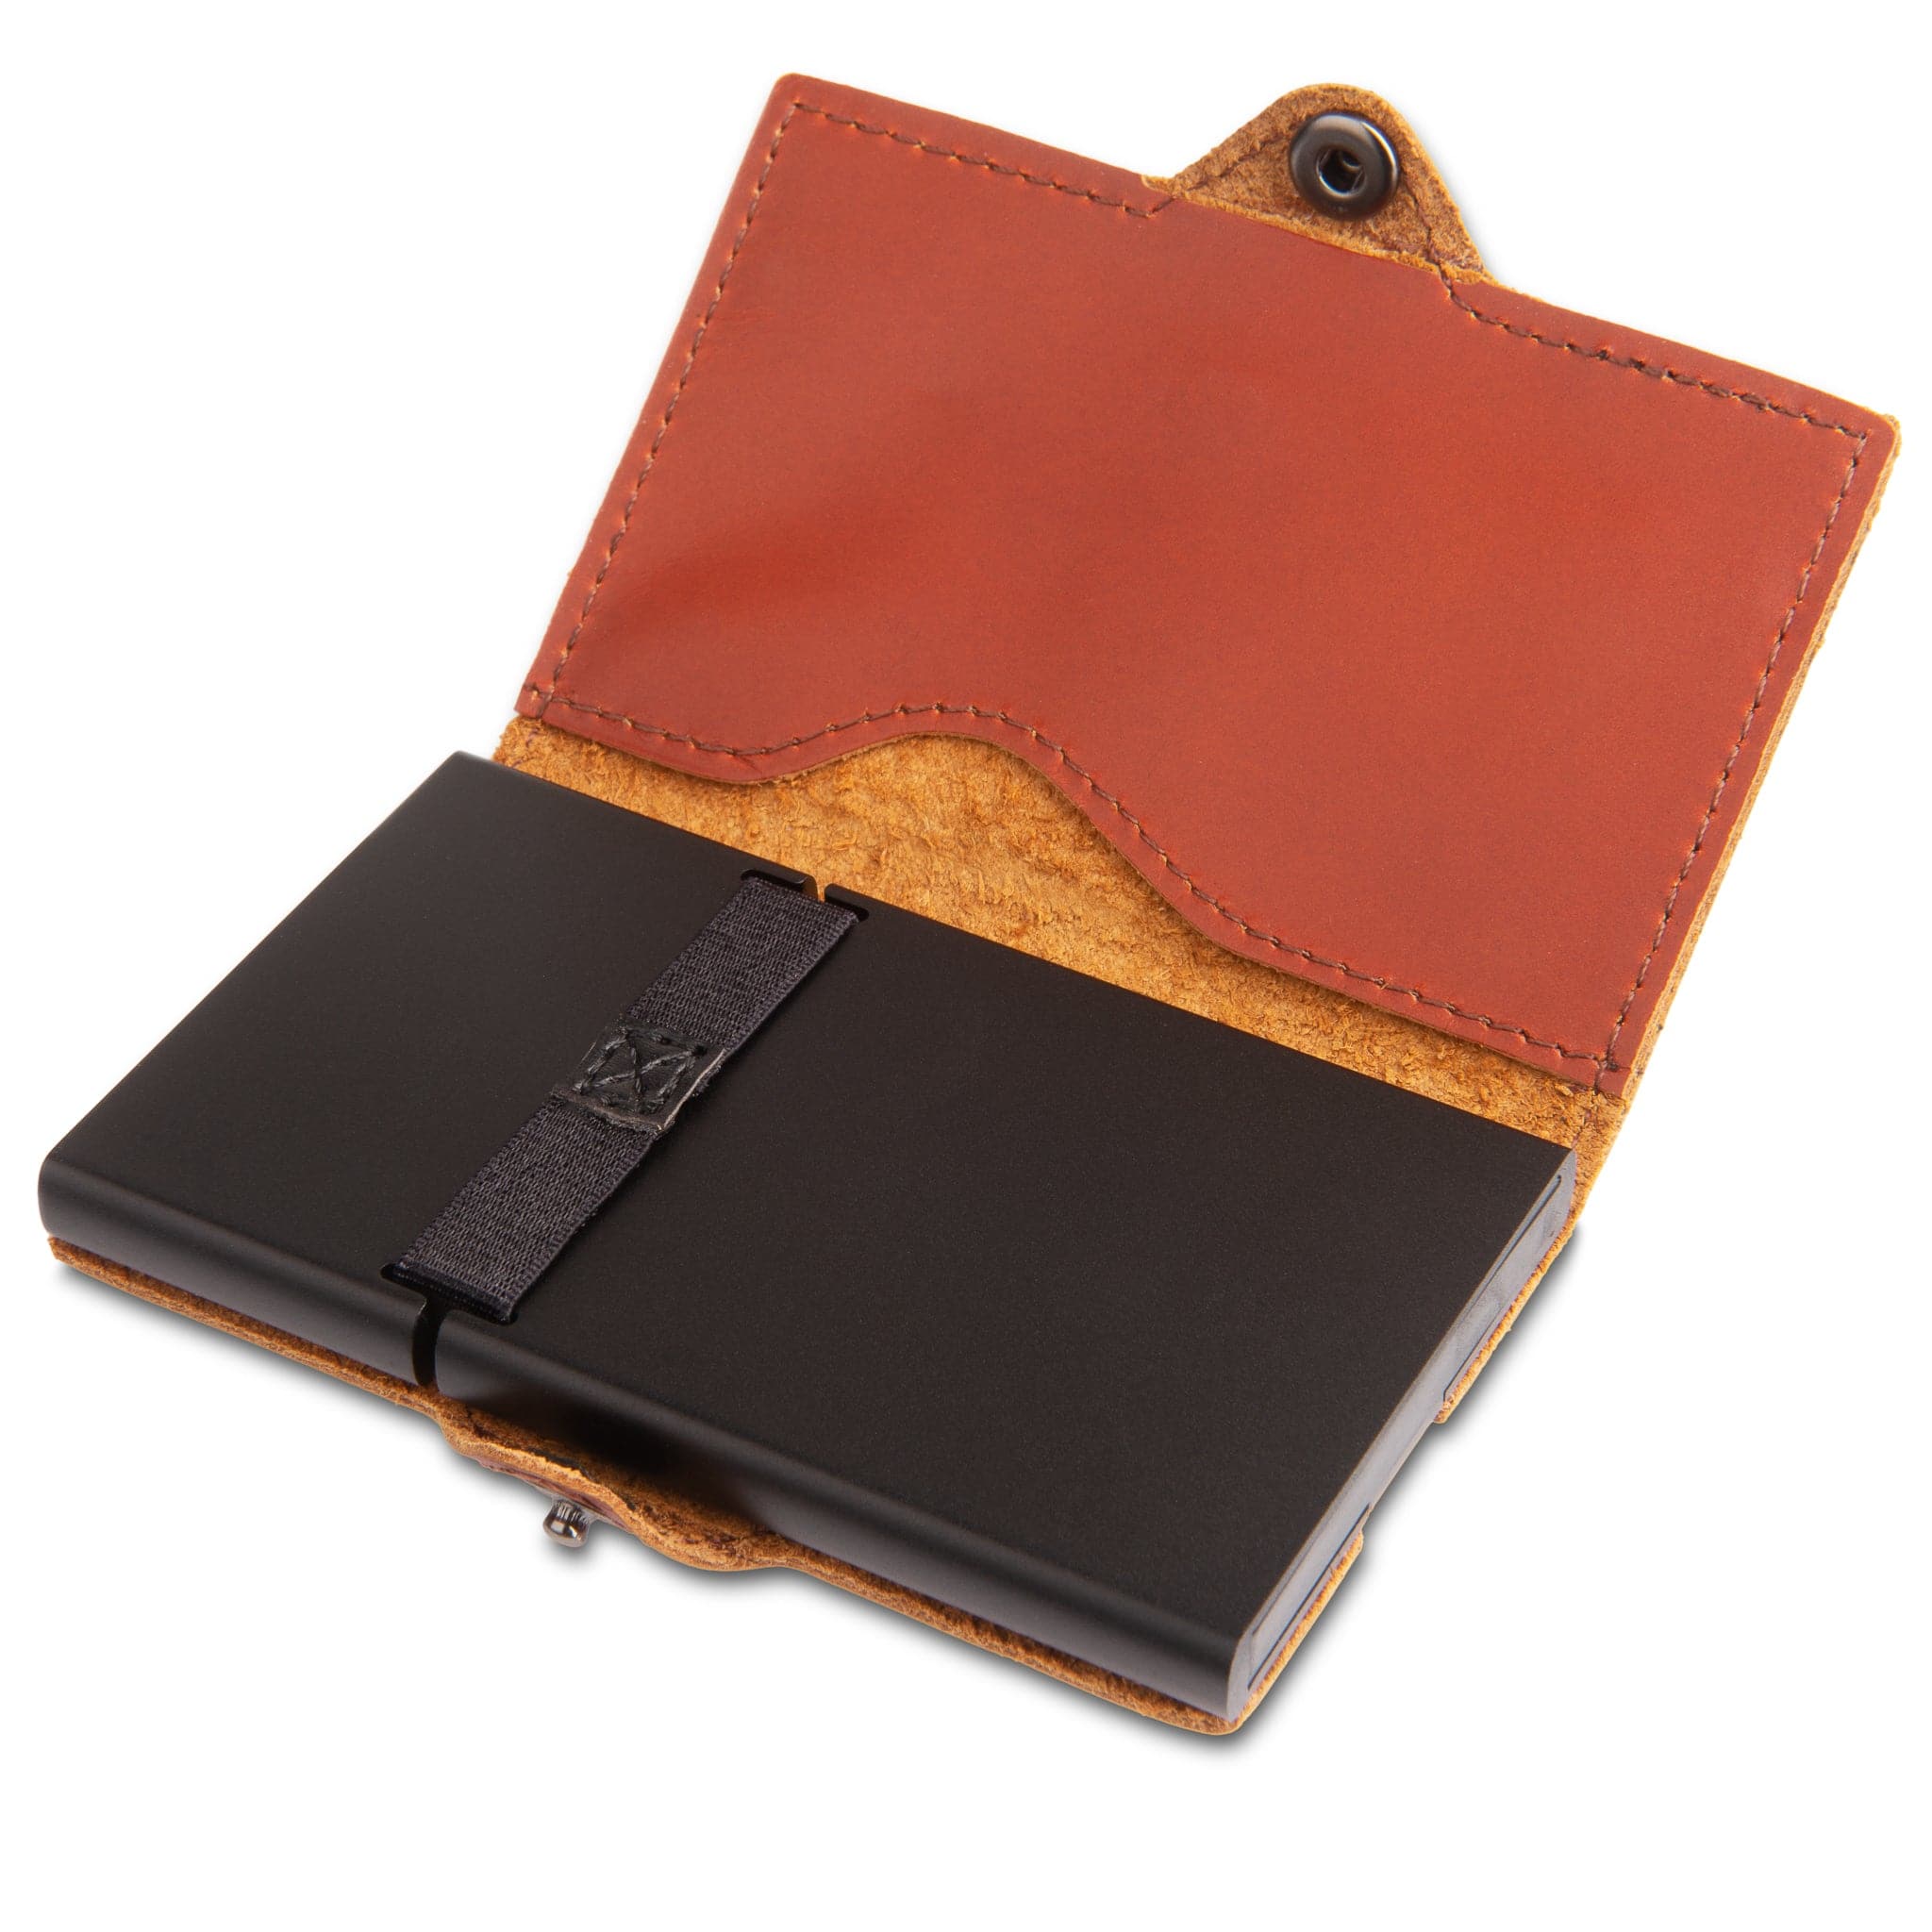 inside of cardinal brown leather wallet